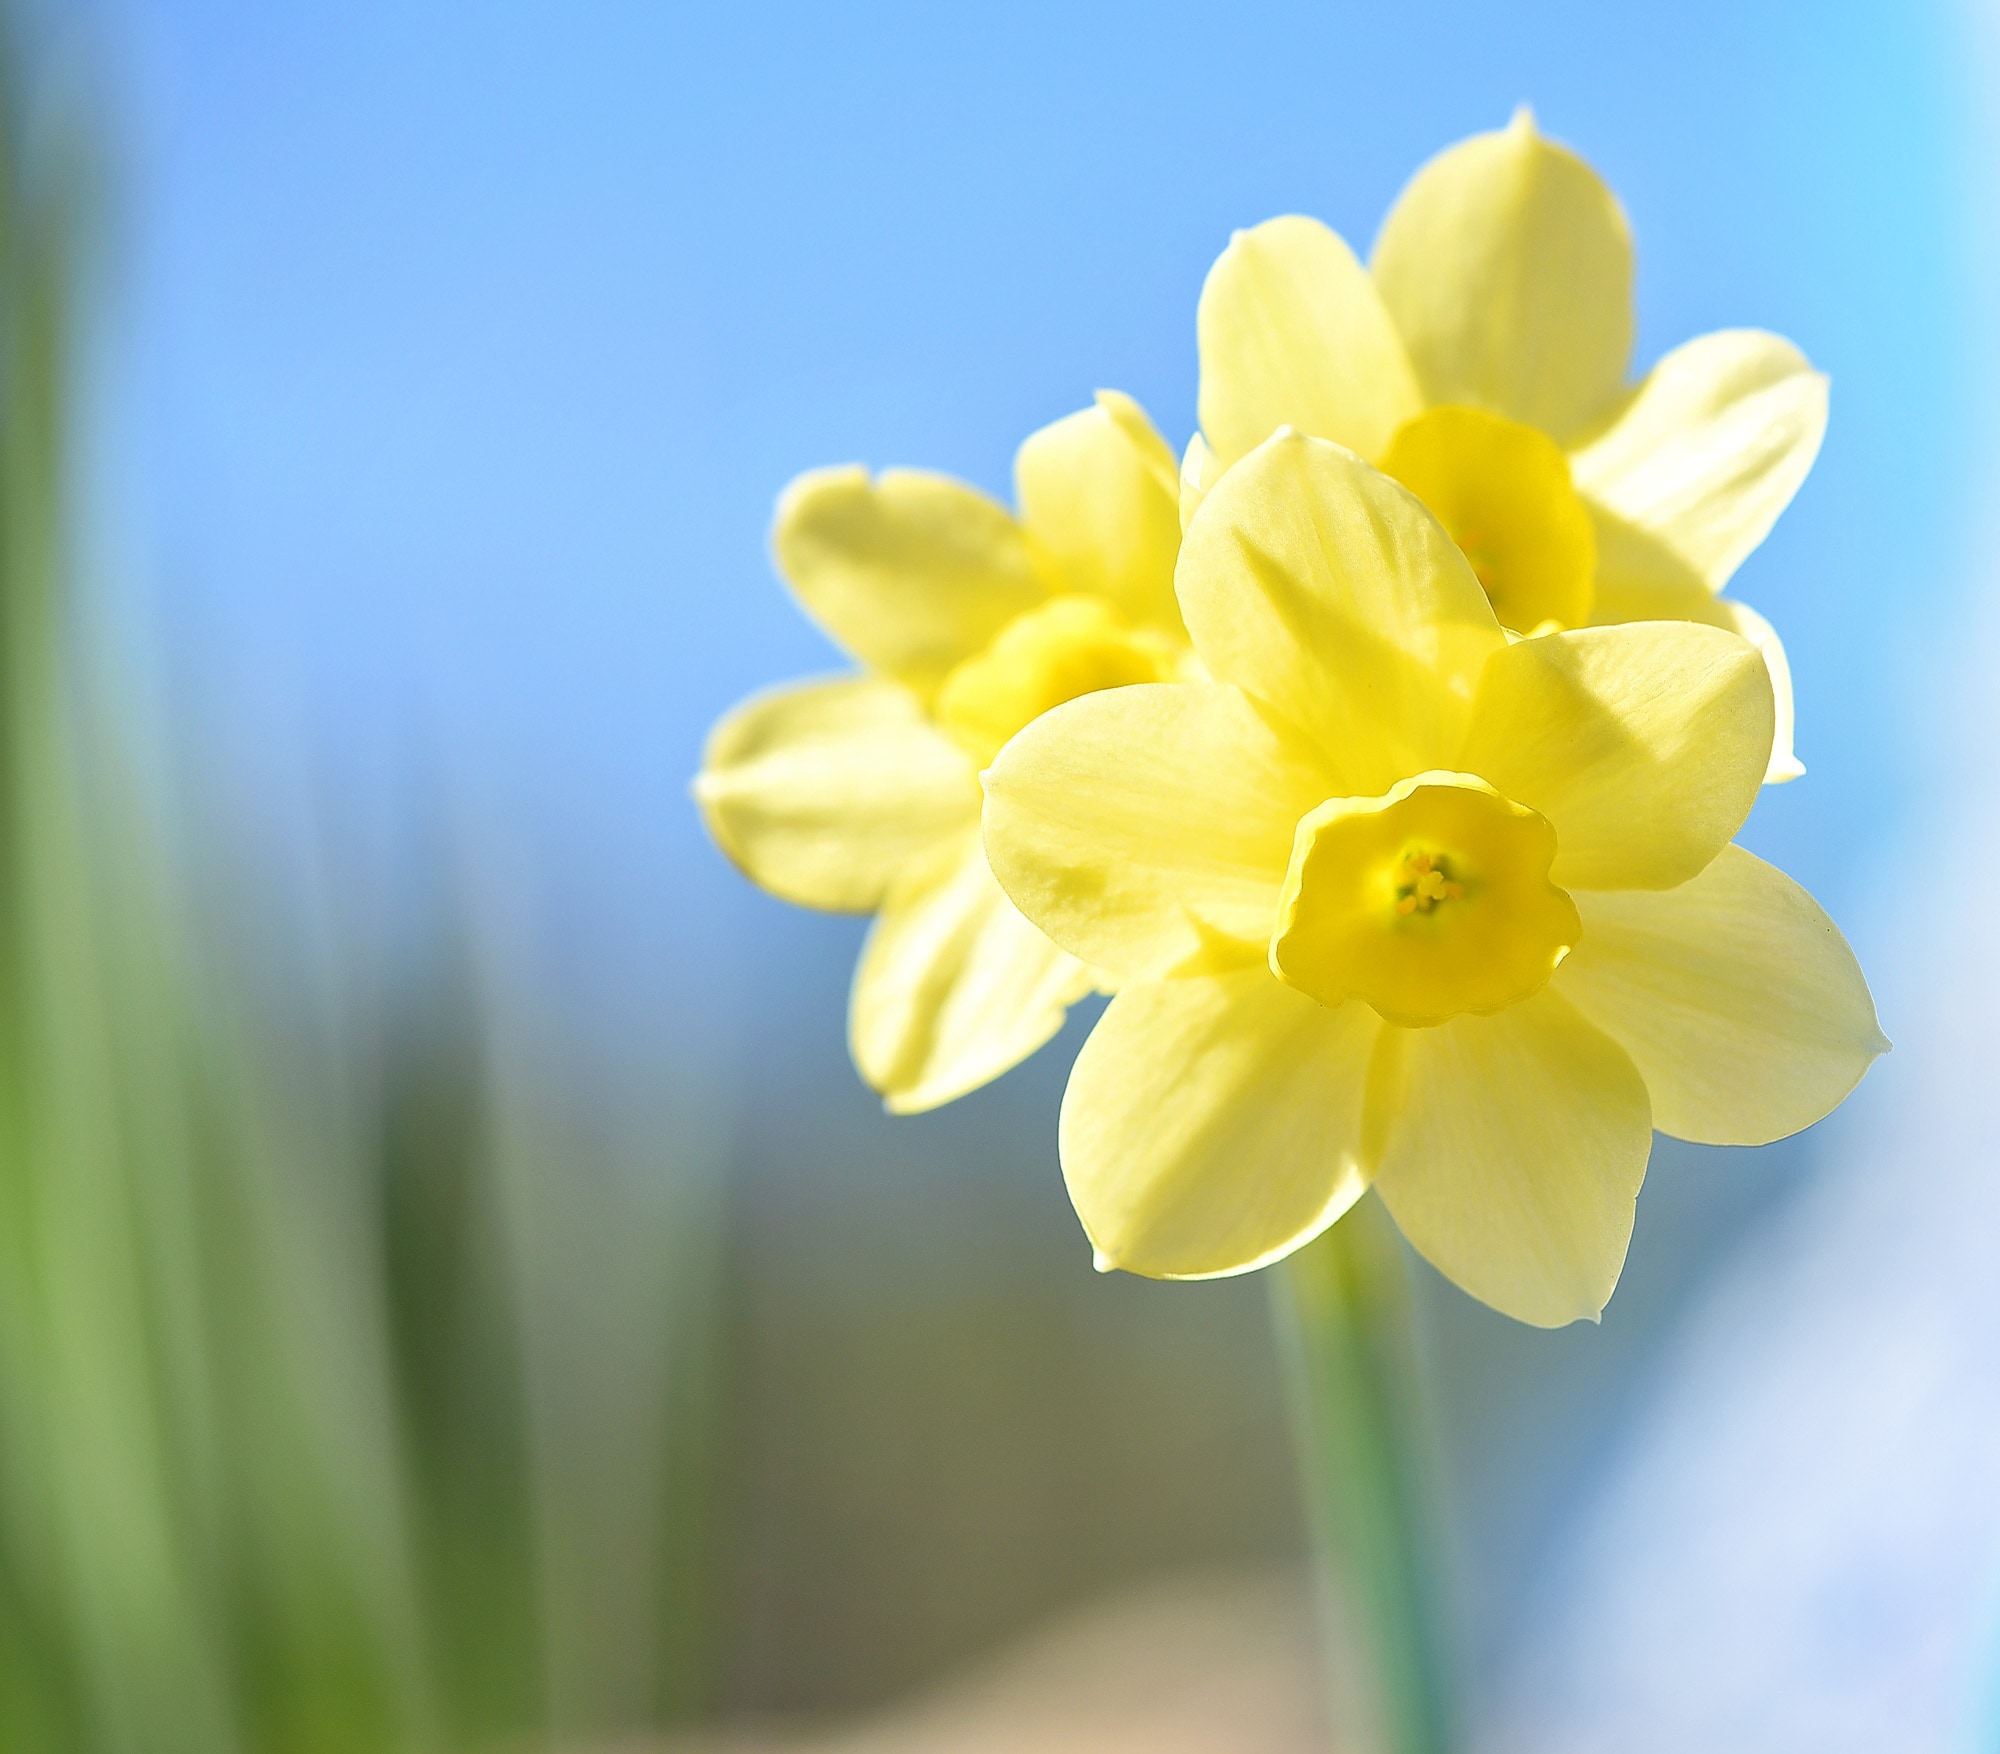 shallow focus photography of yellow daffodils